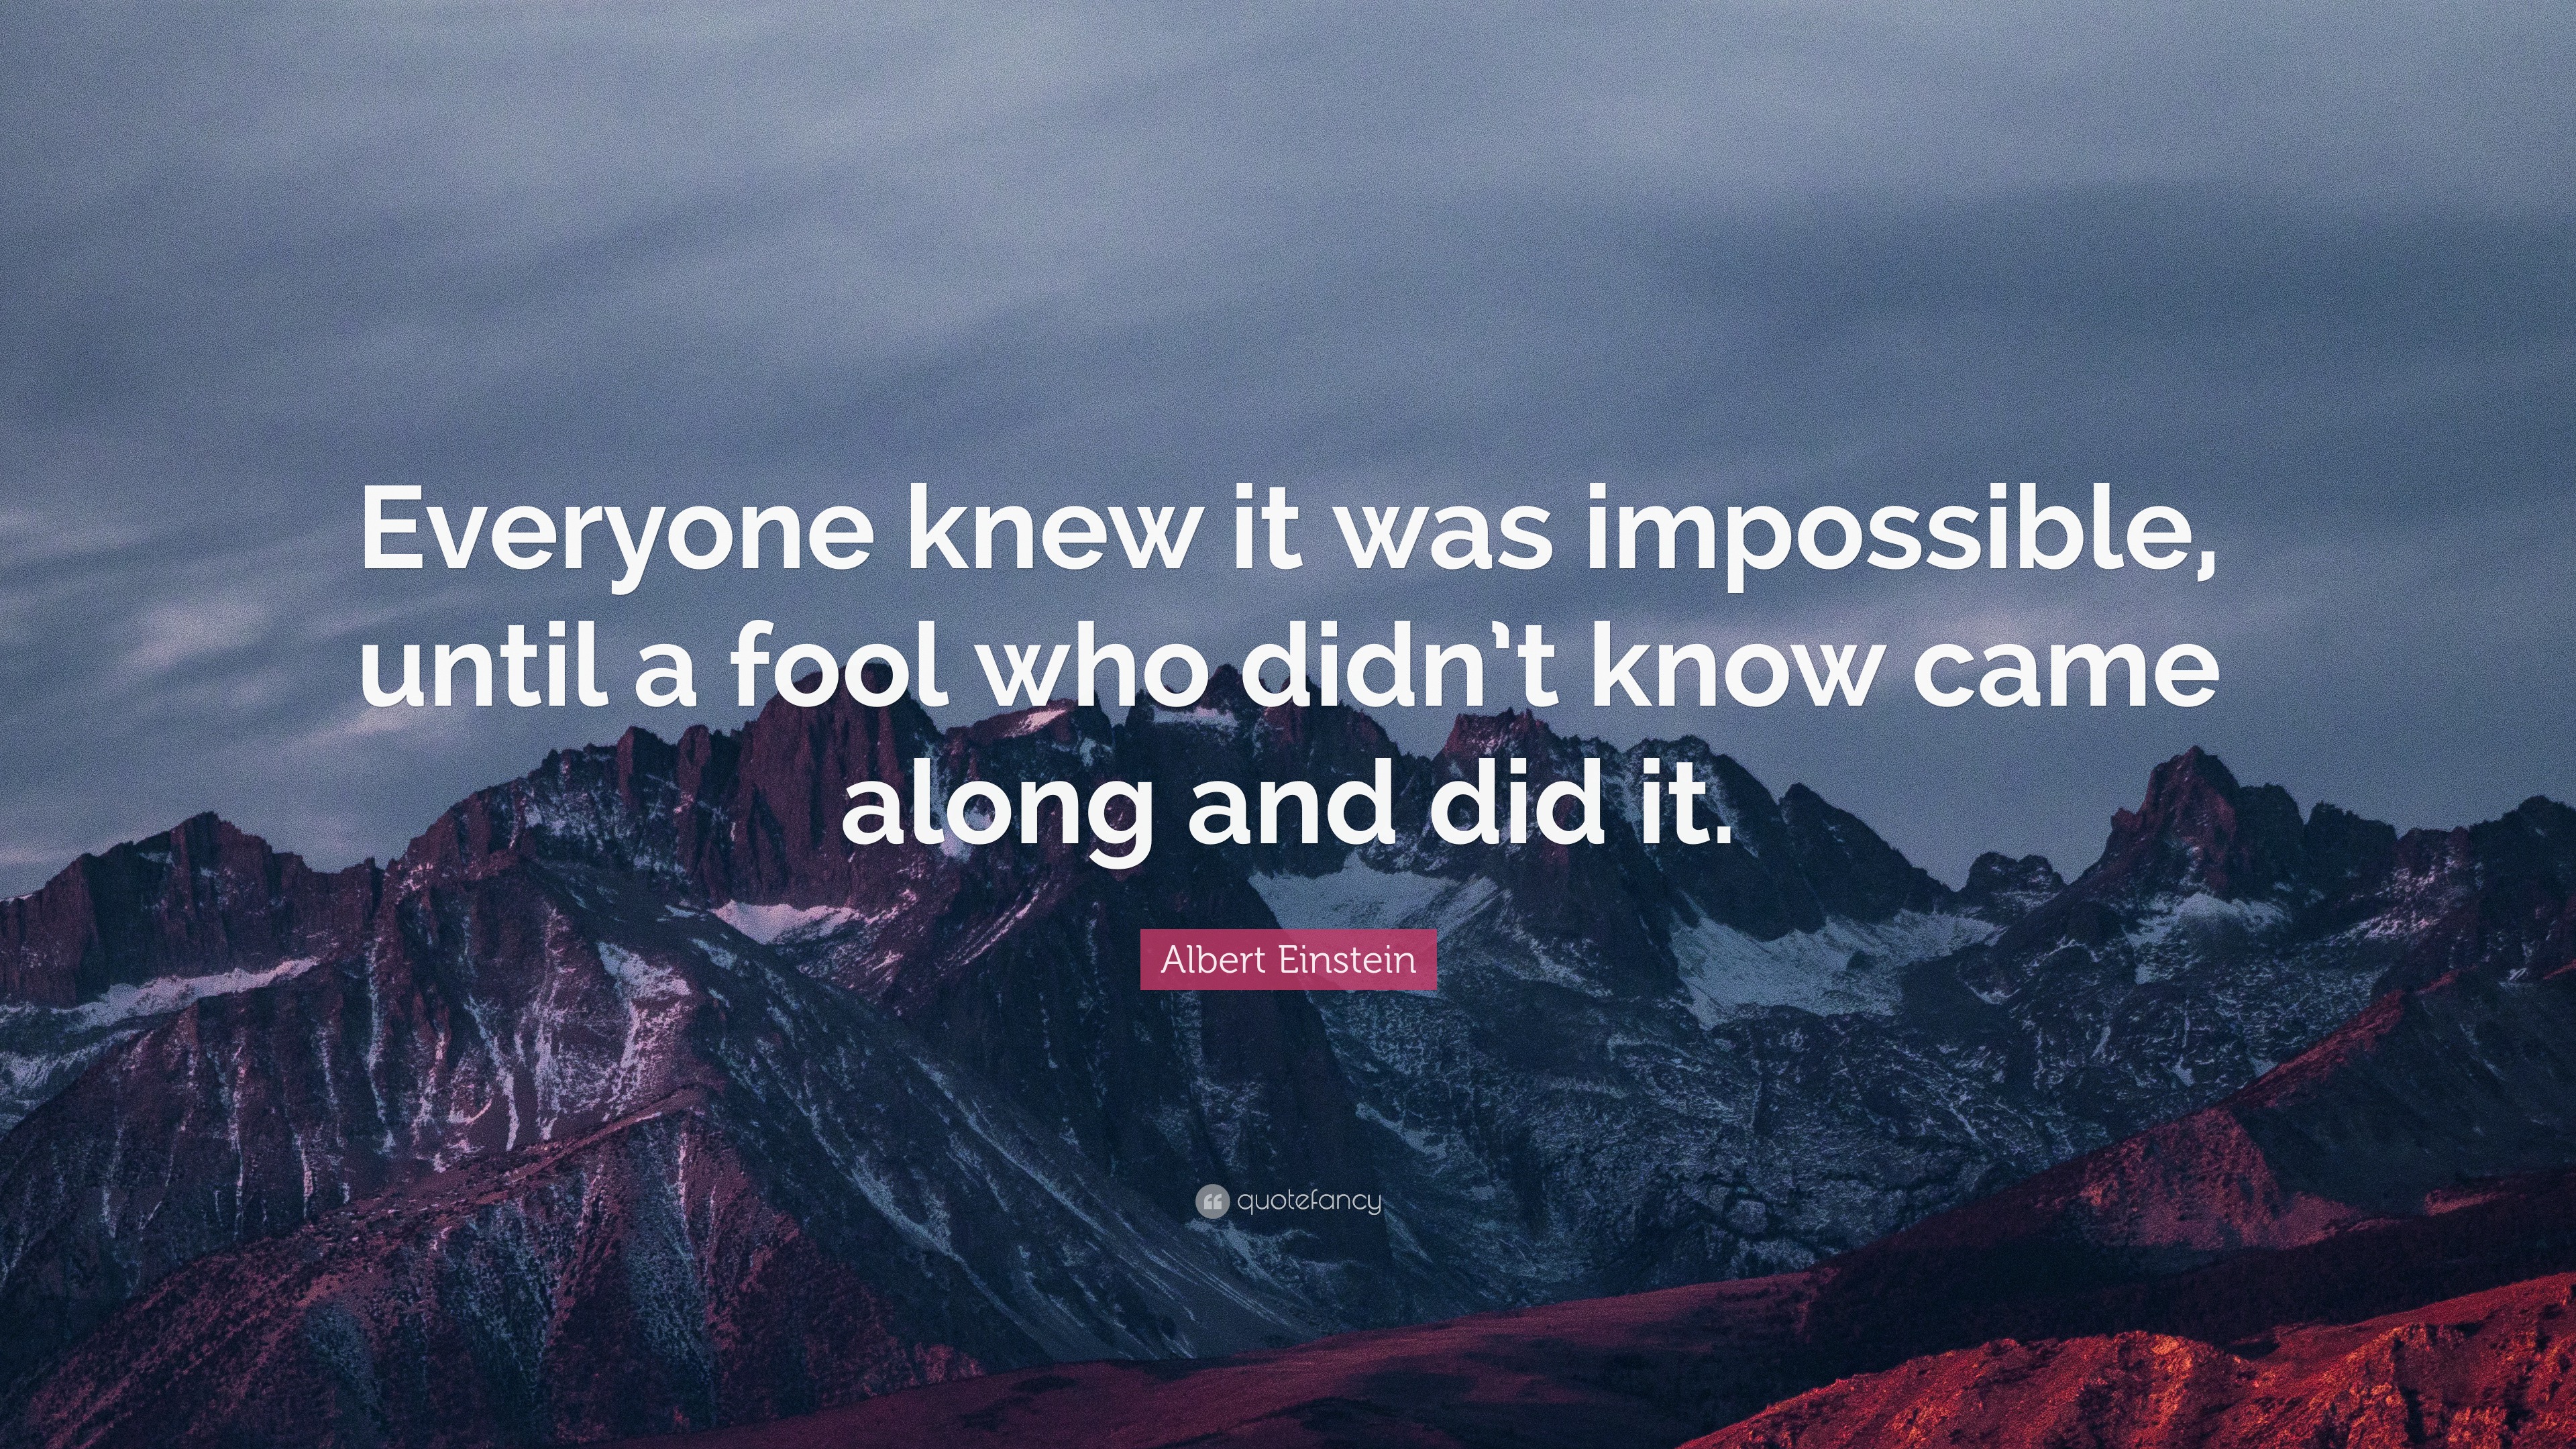 Albert Einstein Quote: “Everyone knew it was impossible, until a fool ...